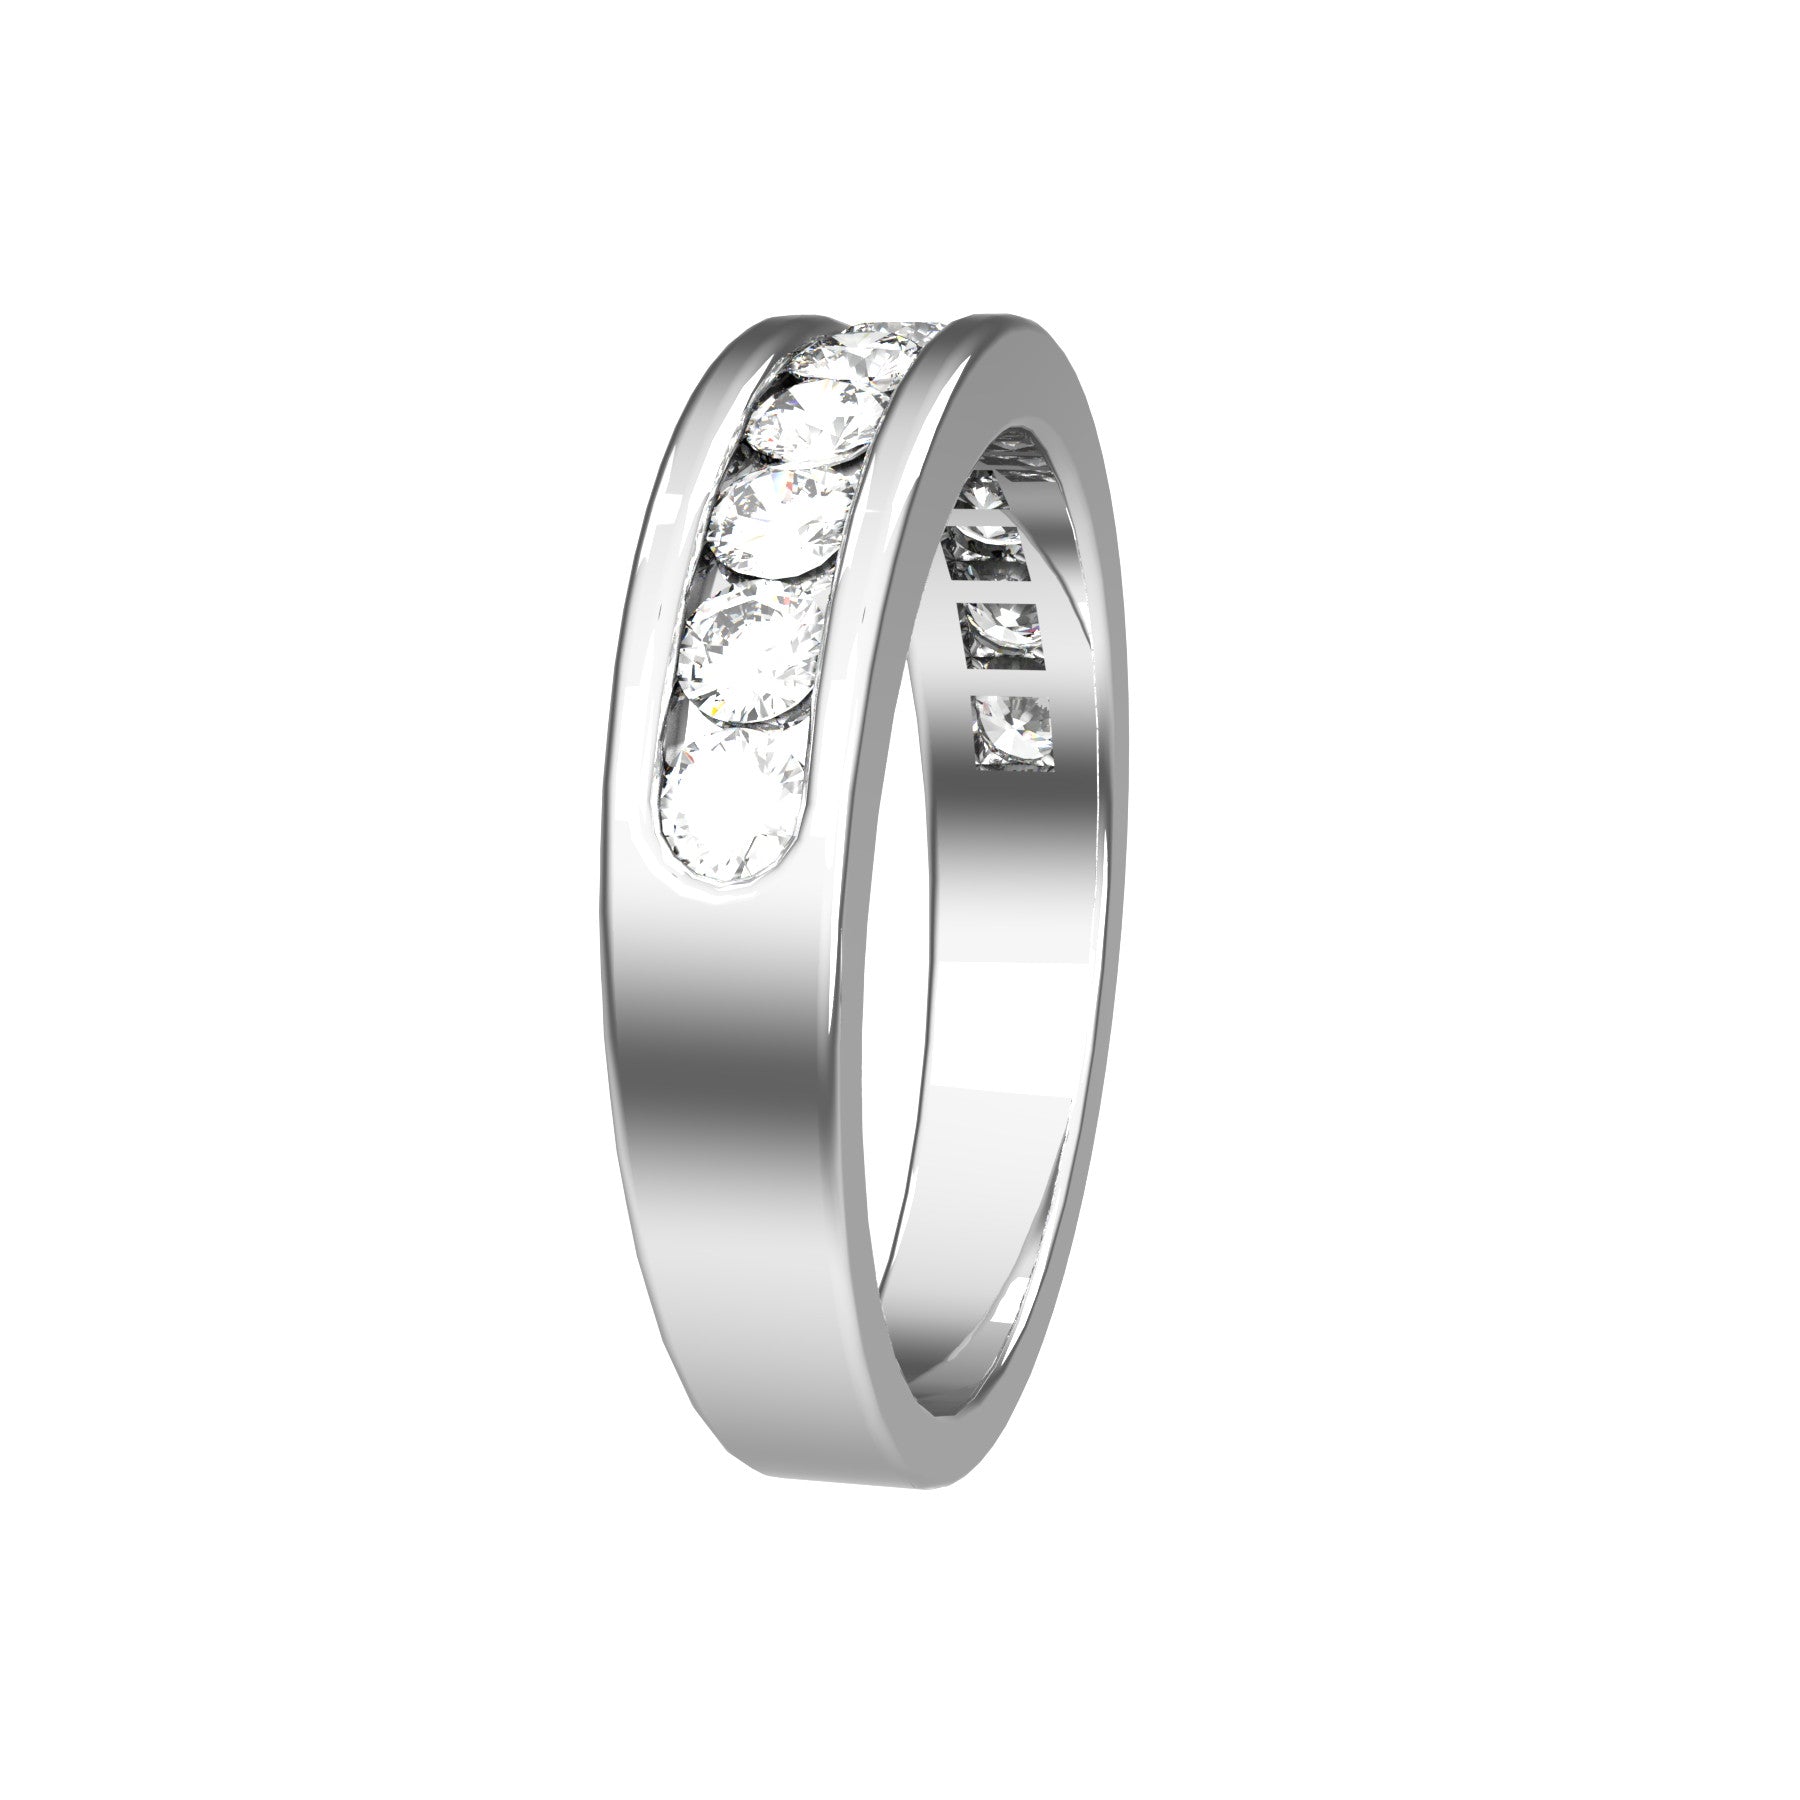 perpetual half wedding ring, 18 K white gold, 0,05 ct round natural diamond, weight about 4,1 g. (0.14 oz), width 4,50 mm